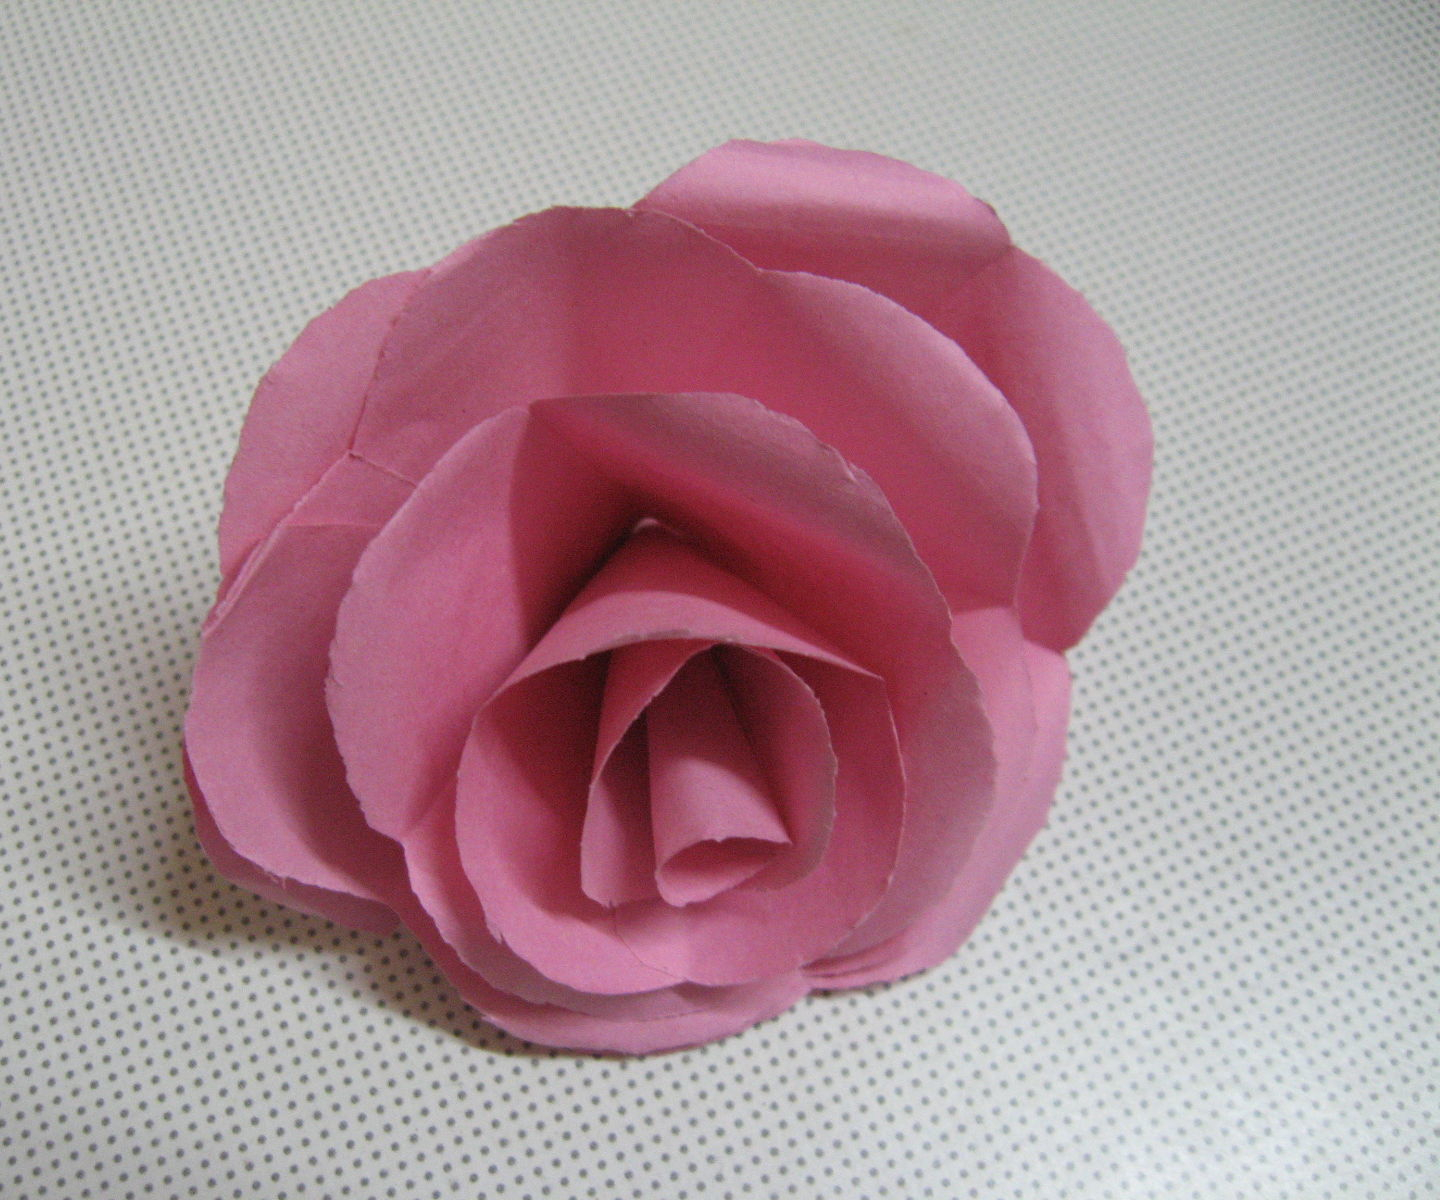 How To Make An Origami Rose Easy How To Make Real Looking Paper Roses 7 Steps With Pictures